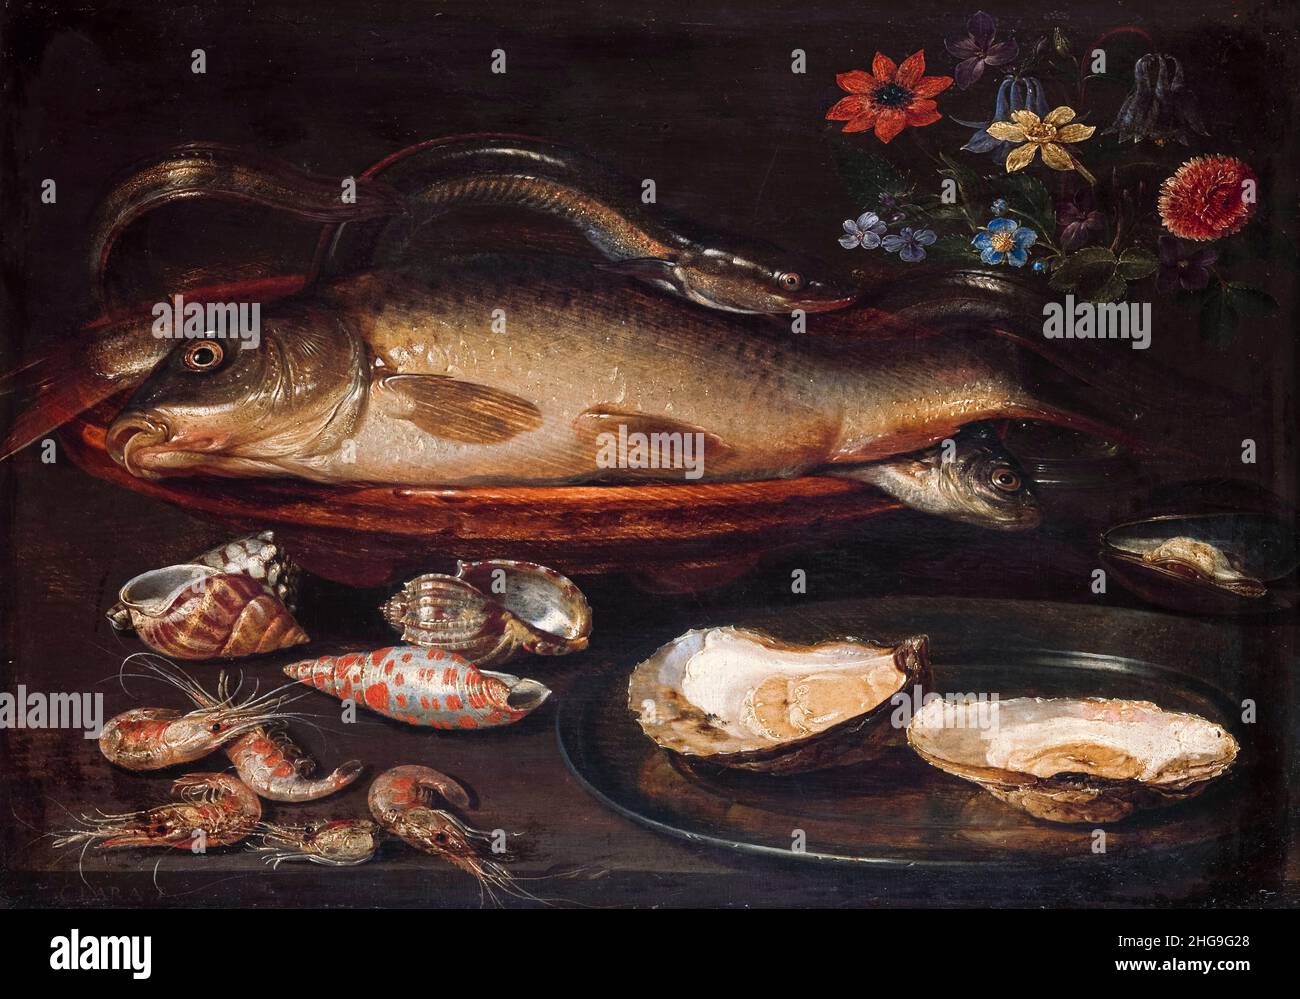 Still Life with Fish, Sea Food and Flowers, peinture de Clara Peeters, 1612-1615 Banque D'Images